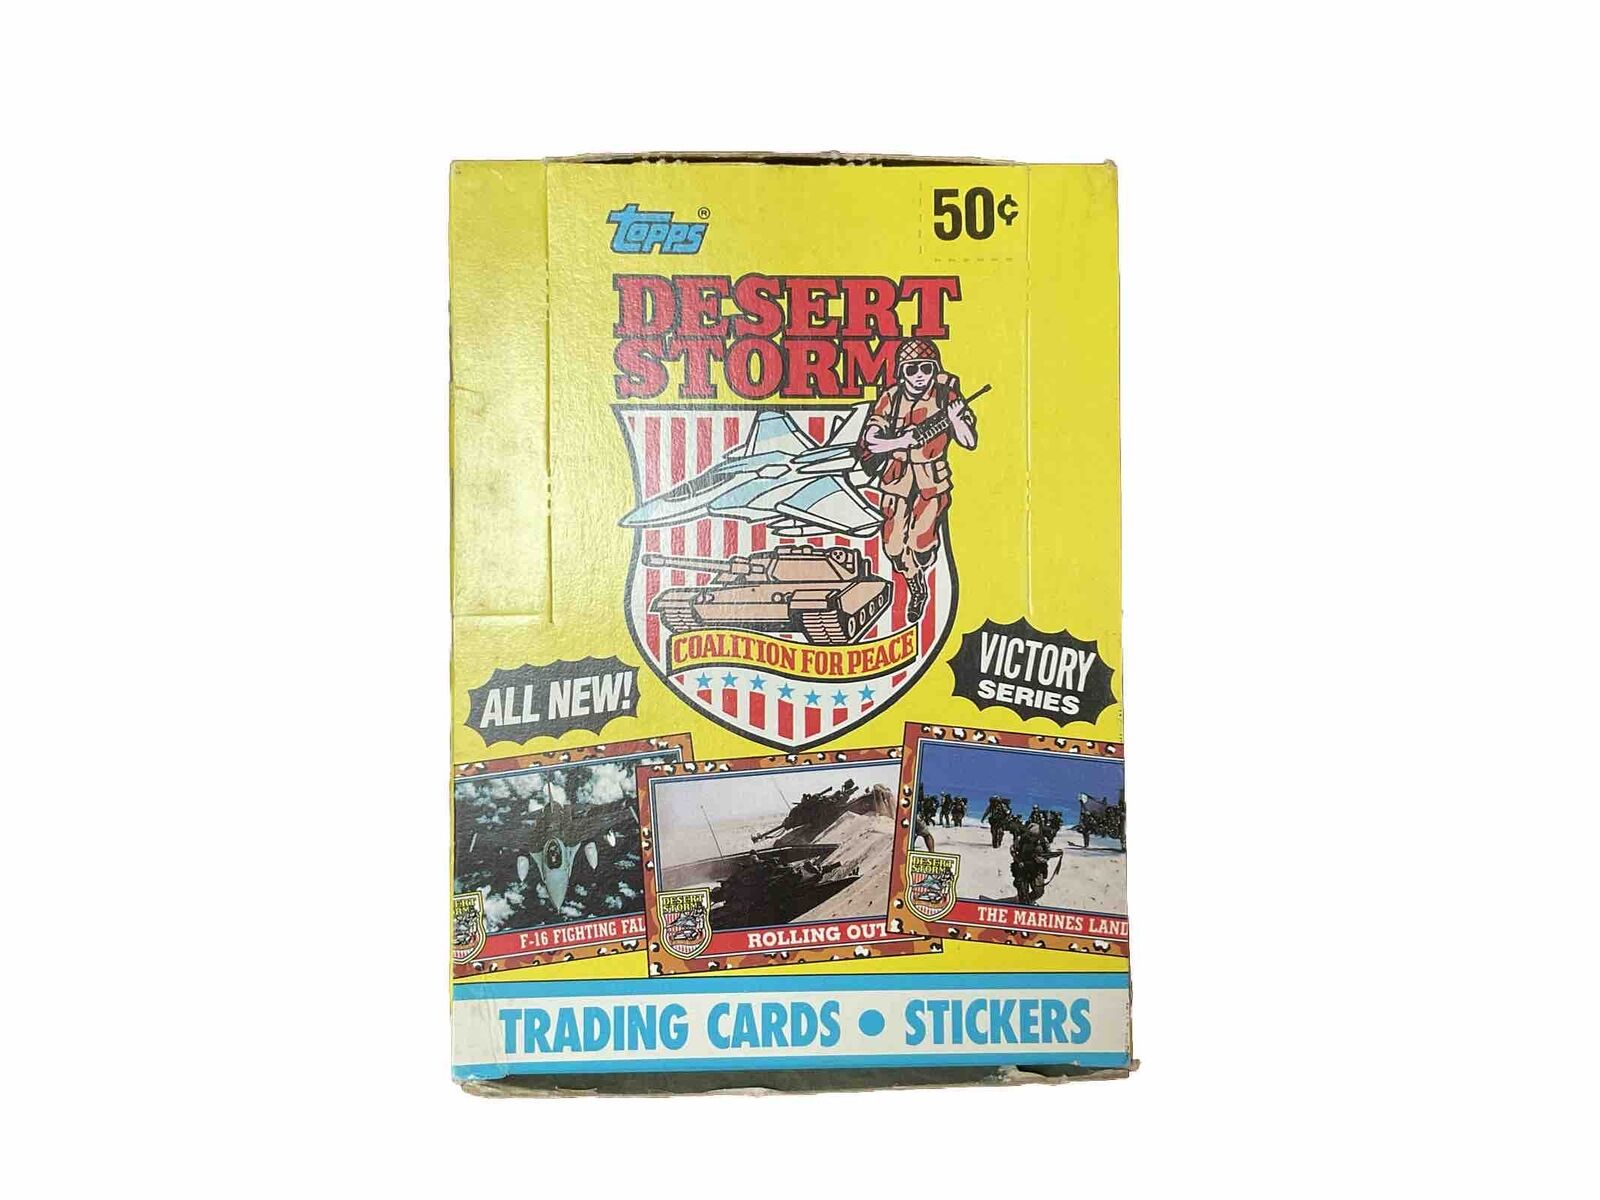 1991 Topps Desert Storm Trading Cards Victory Series Wax Box 36 Sealed Packs